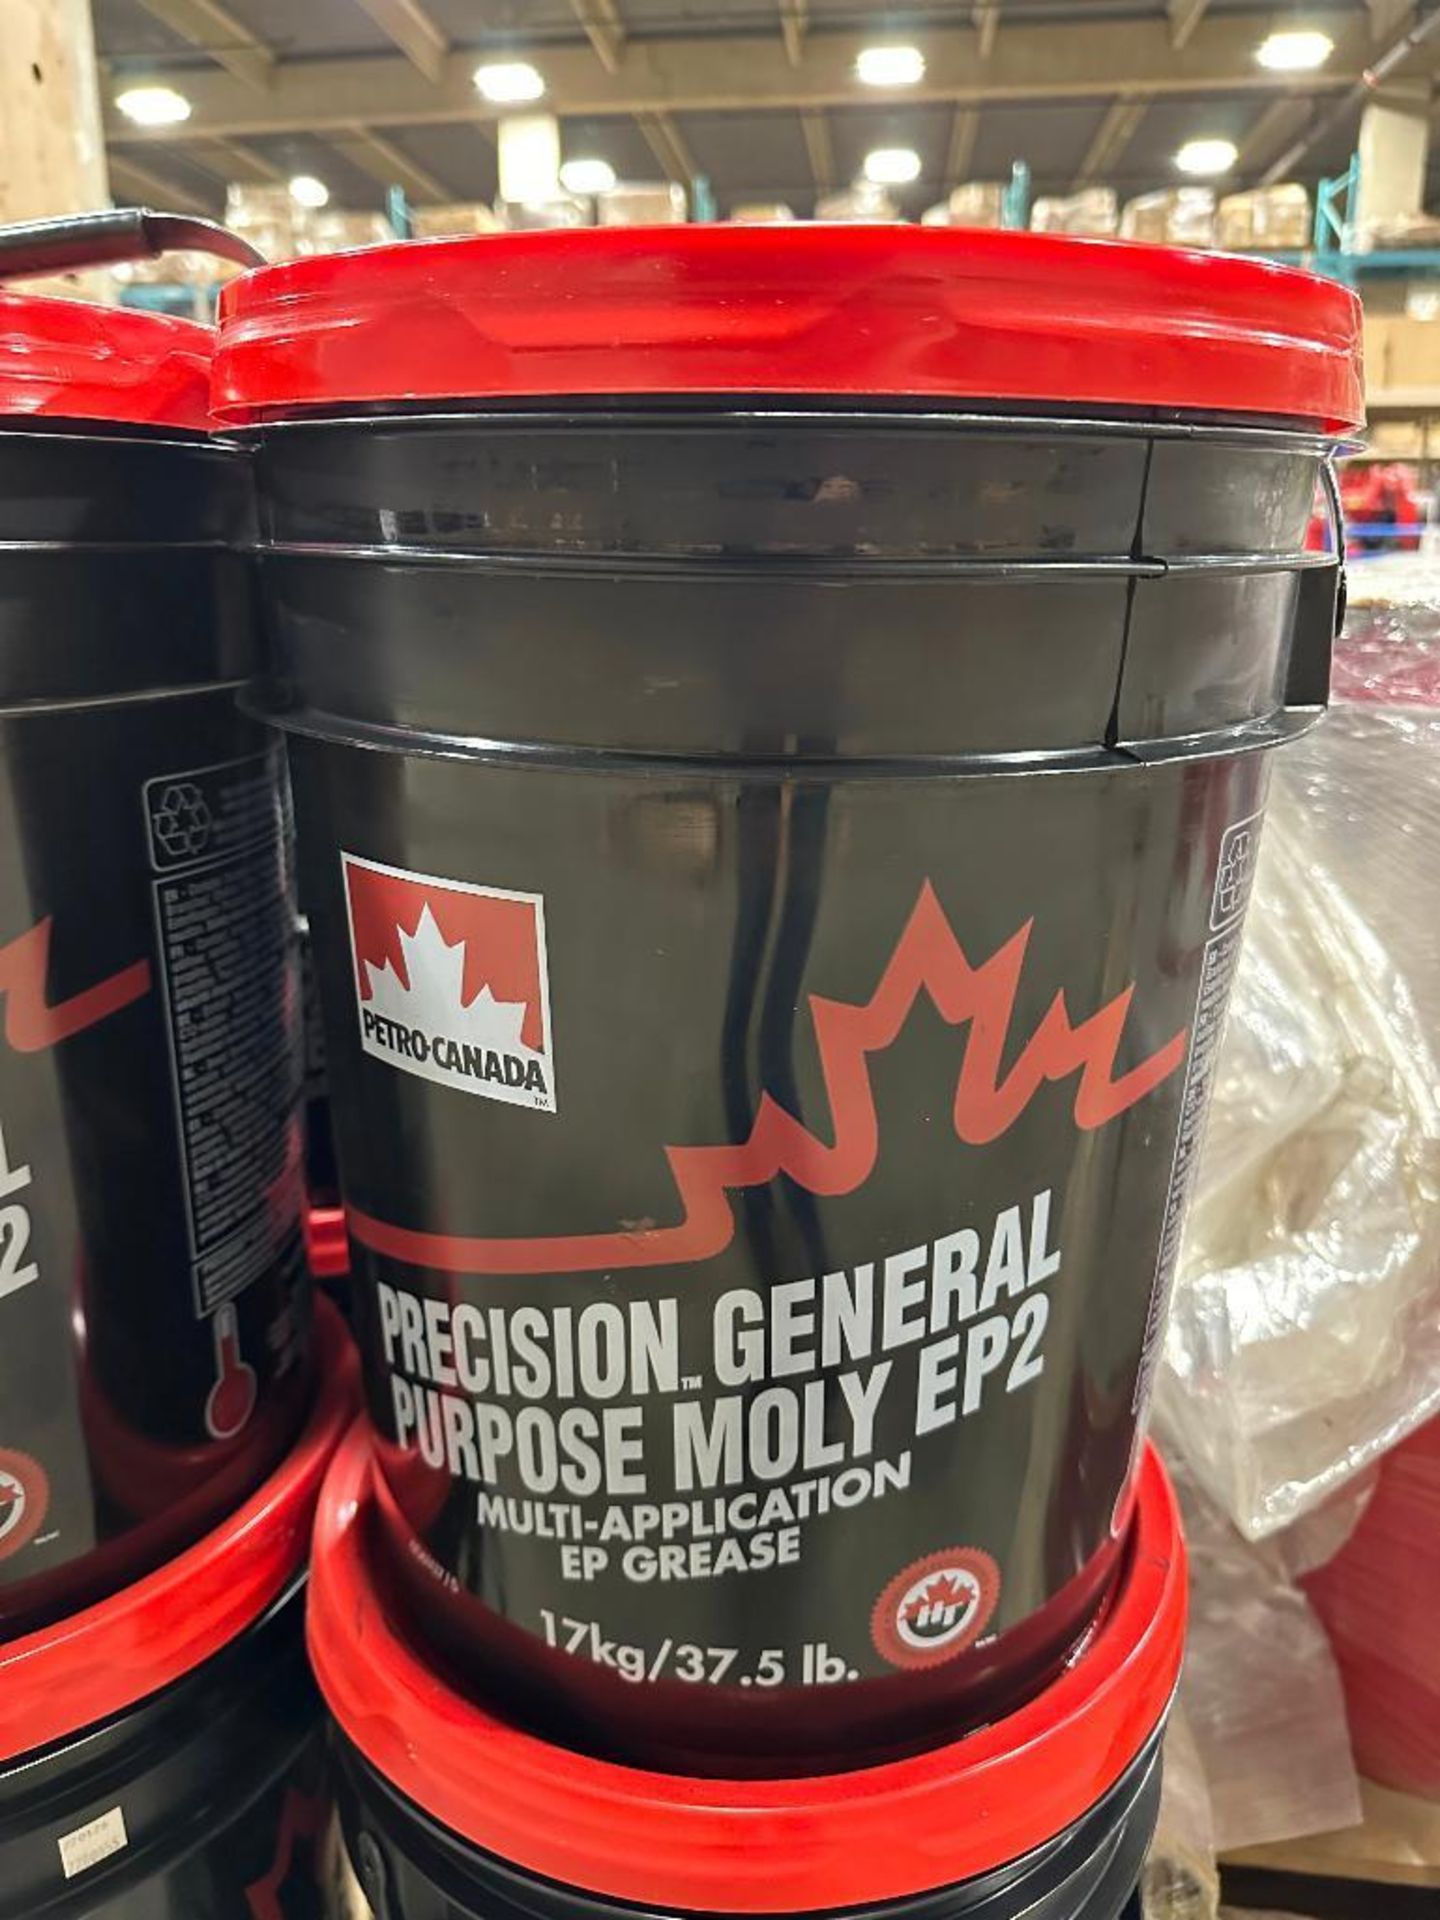 Lot of (8) Pails of Petro Canada Precision General Purpose Moly EP2 Grease - Image 4 of 4